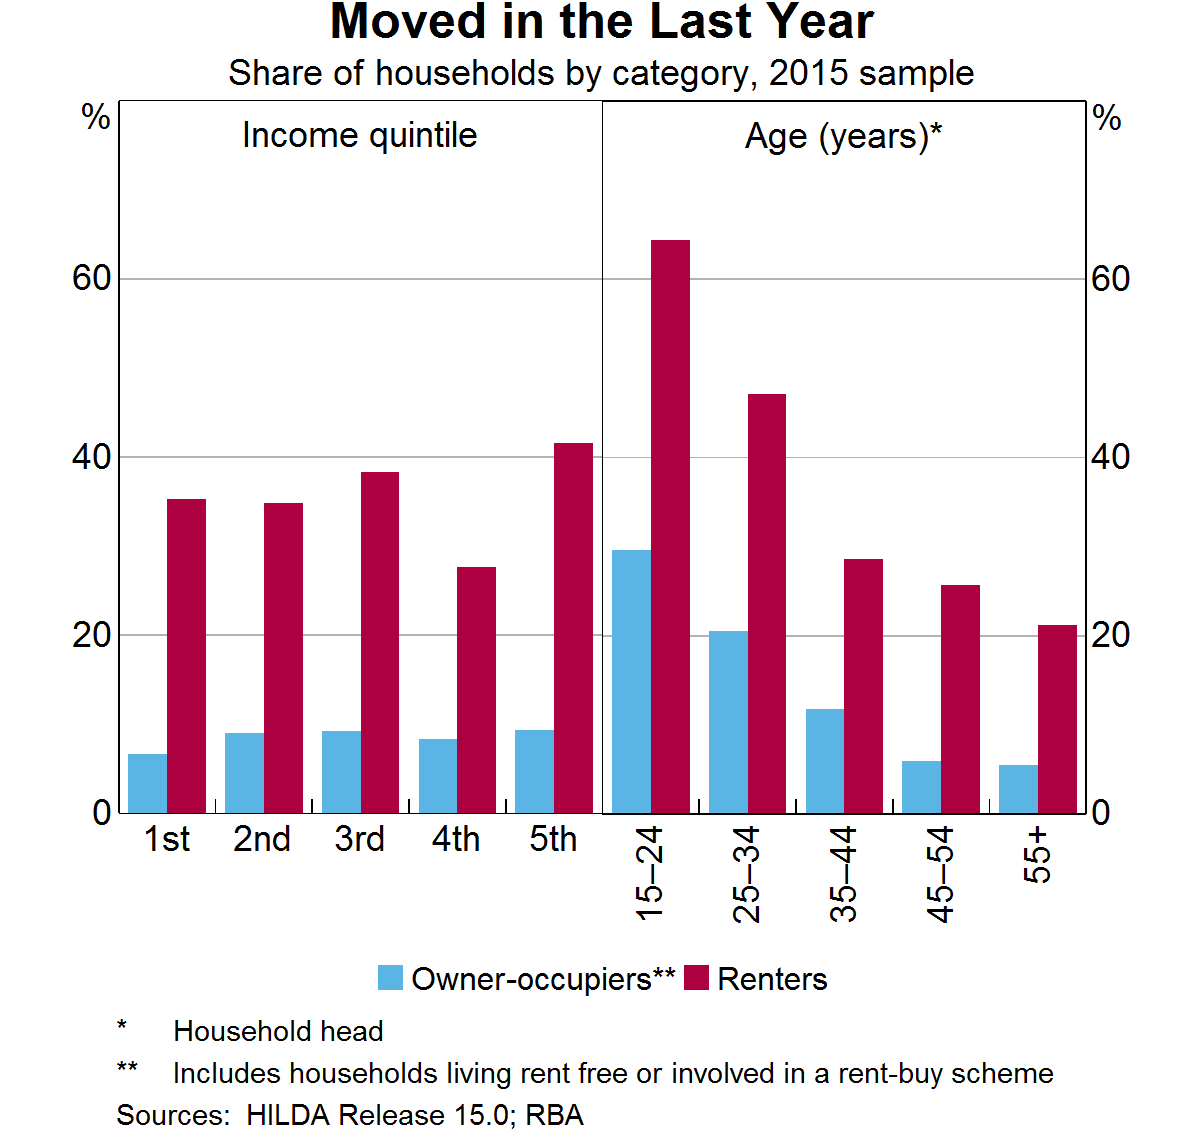 Graph 8: Moved in the Last Year